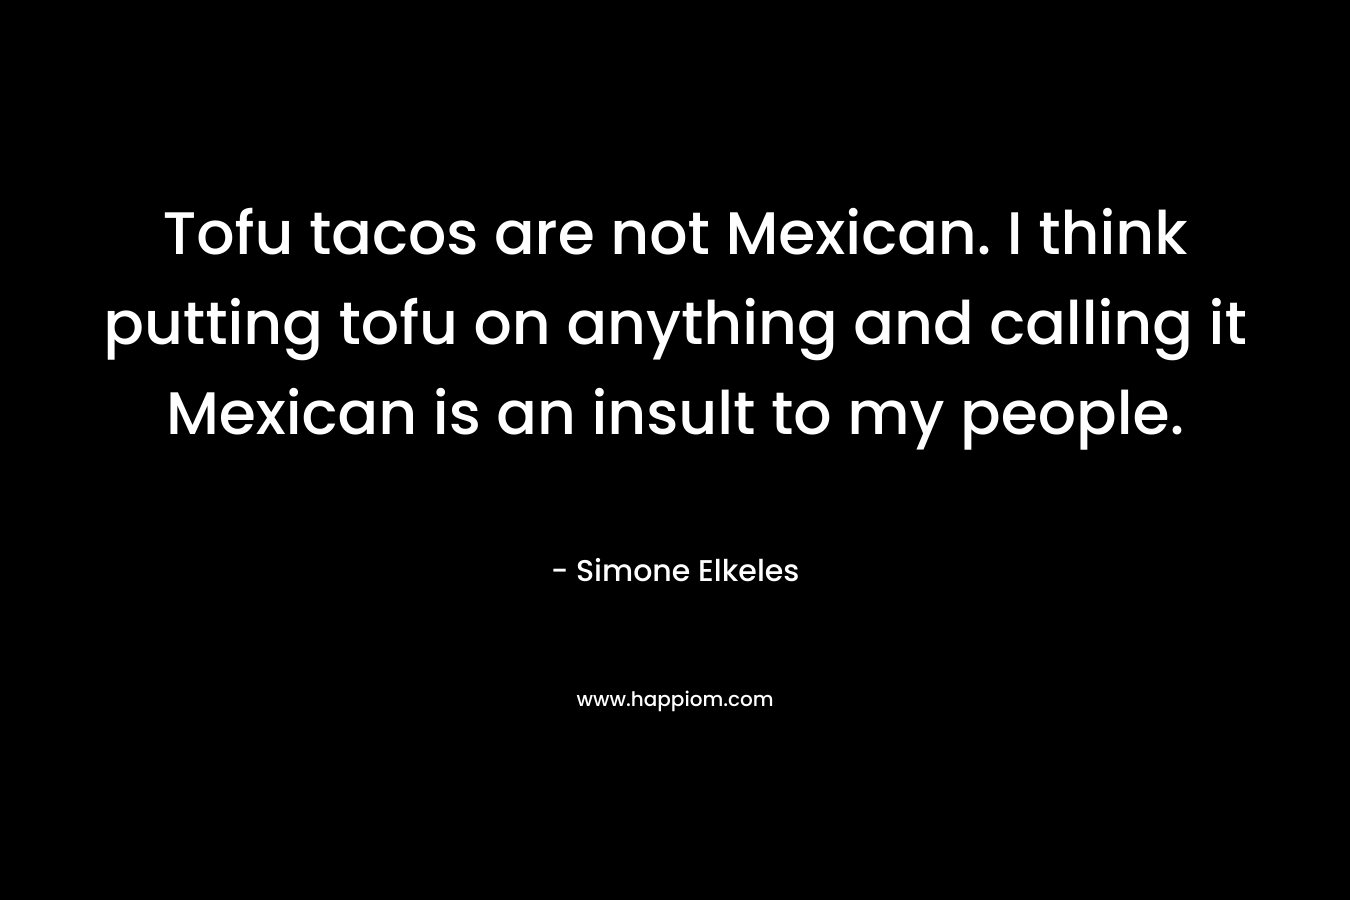 Tofu tacos are not Mexican. I think putting tofu on anything and calling it Mexican is an insult to my people. – Simone Elkeles